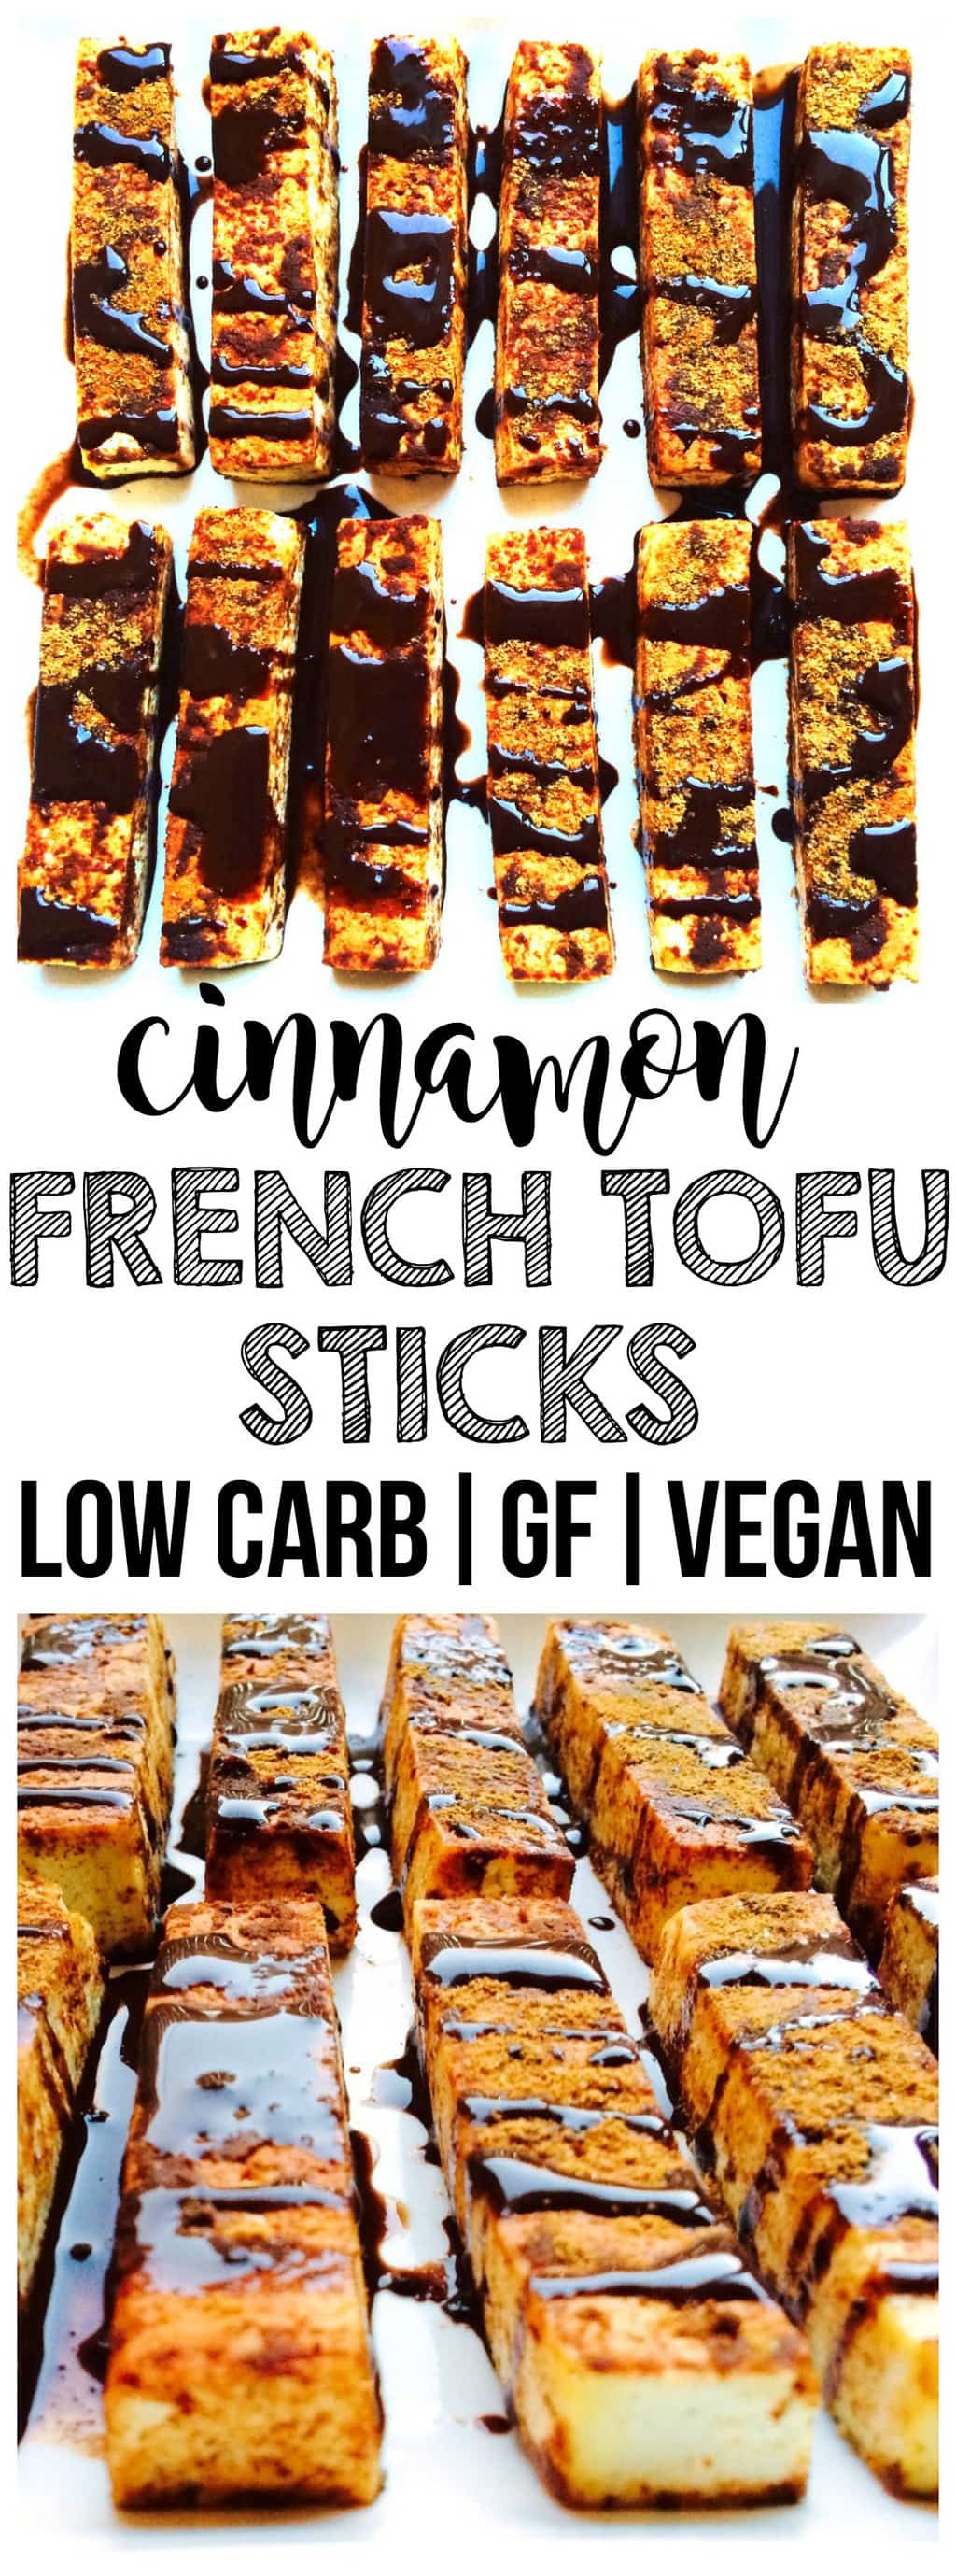 You will LOVE these Keto Cinnamon French Tofu Sticks! They are the perfect low-carb, vegan, gluten-free, dairy-free & sugar-free French toast alternative. A wonderful, high-protein breakfast or brunch recipe!